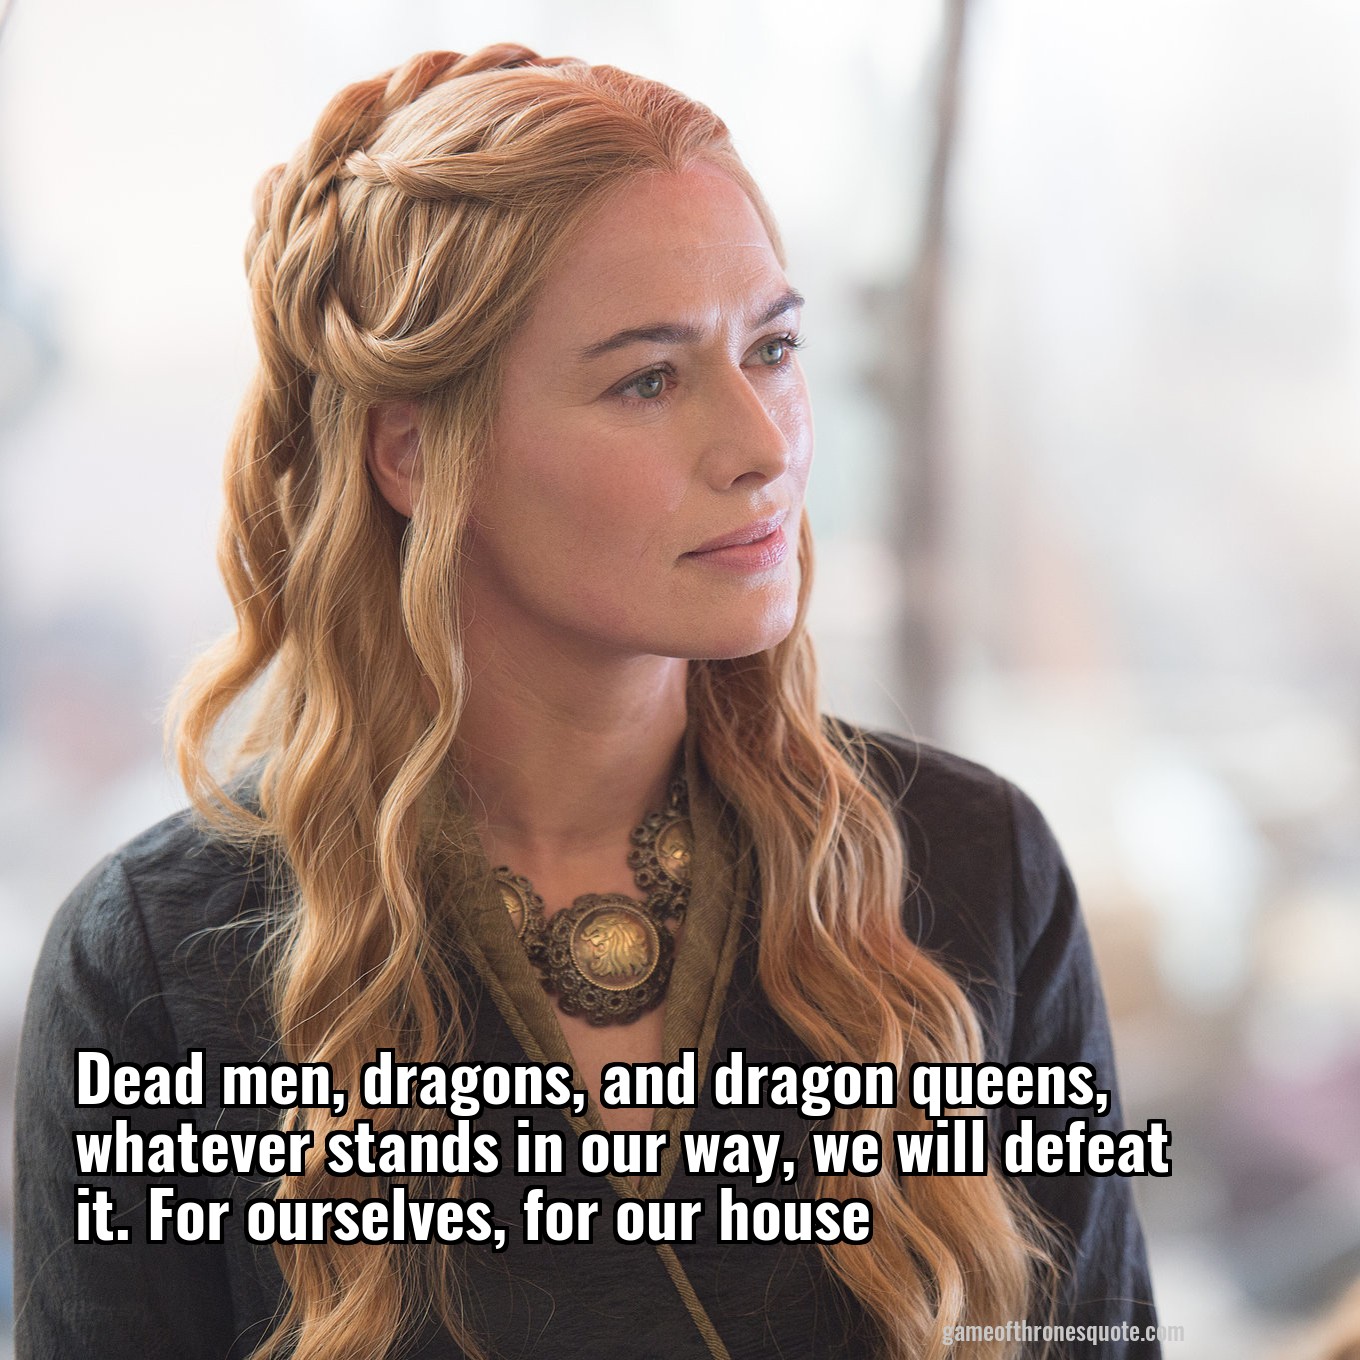 Dead men, dragons, and dragon queens, whatever stands in our way, we will defeat it. For ourselves, for our house